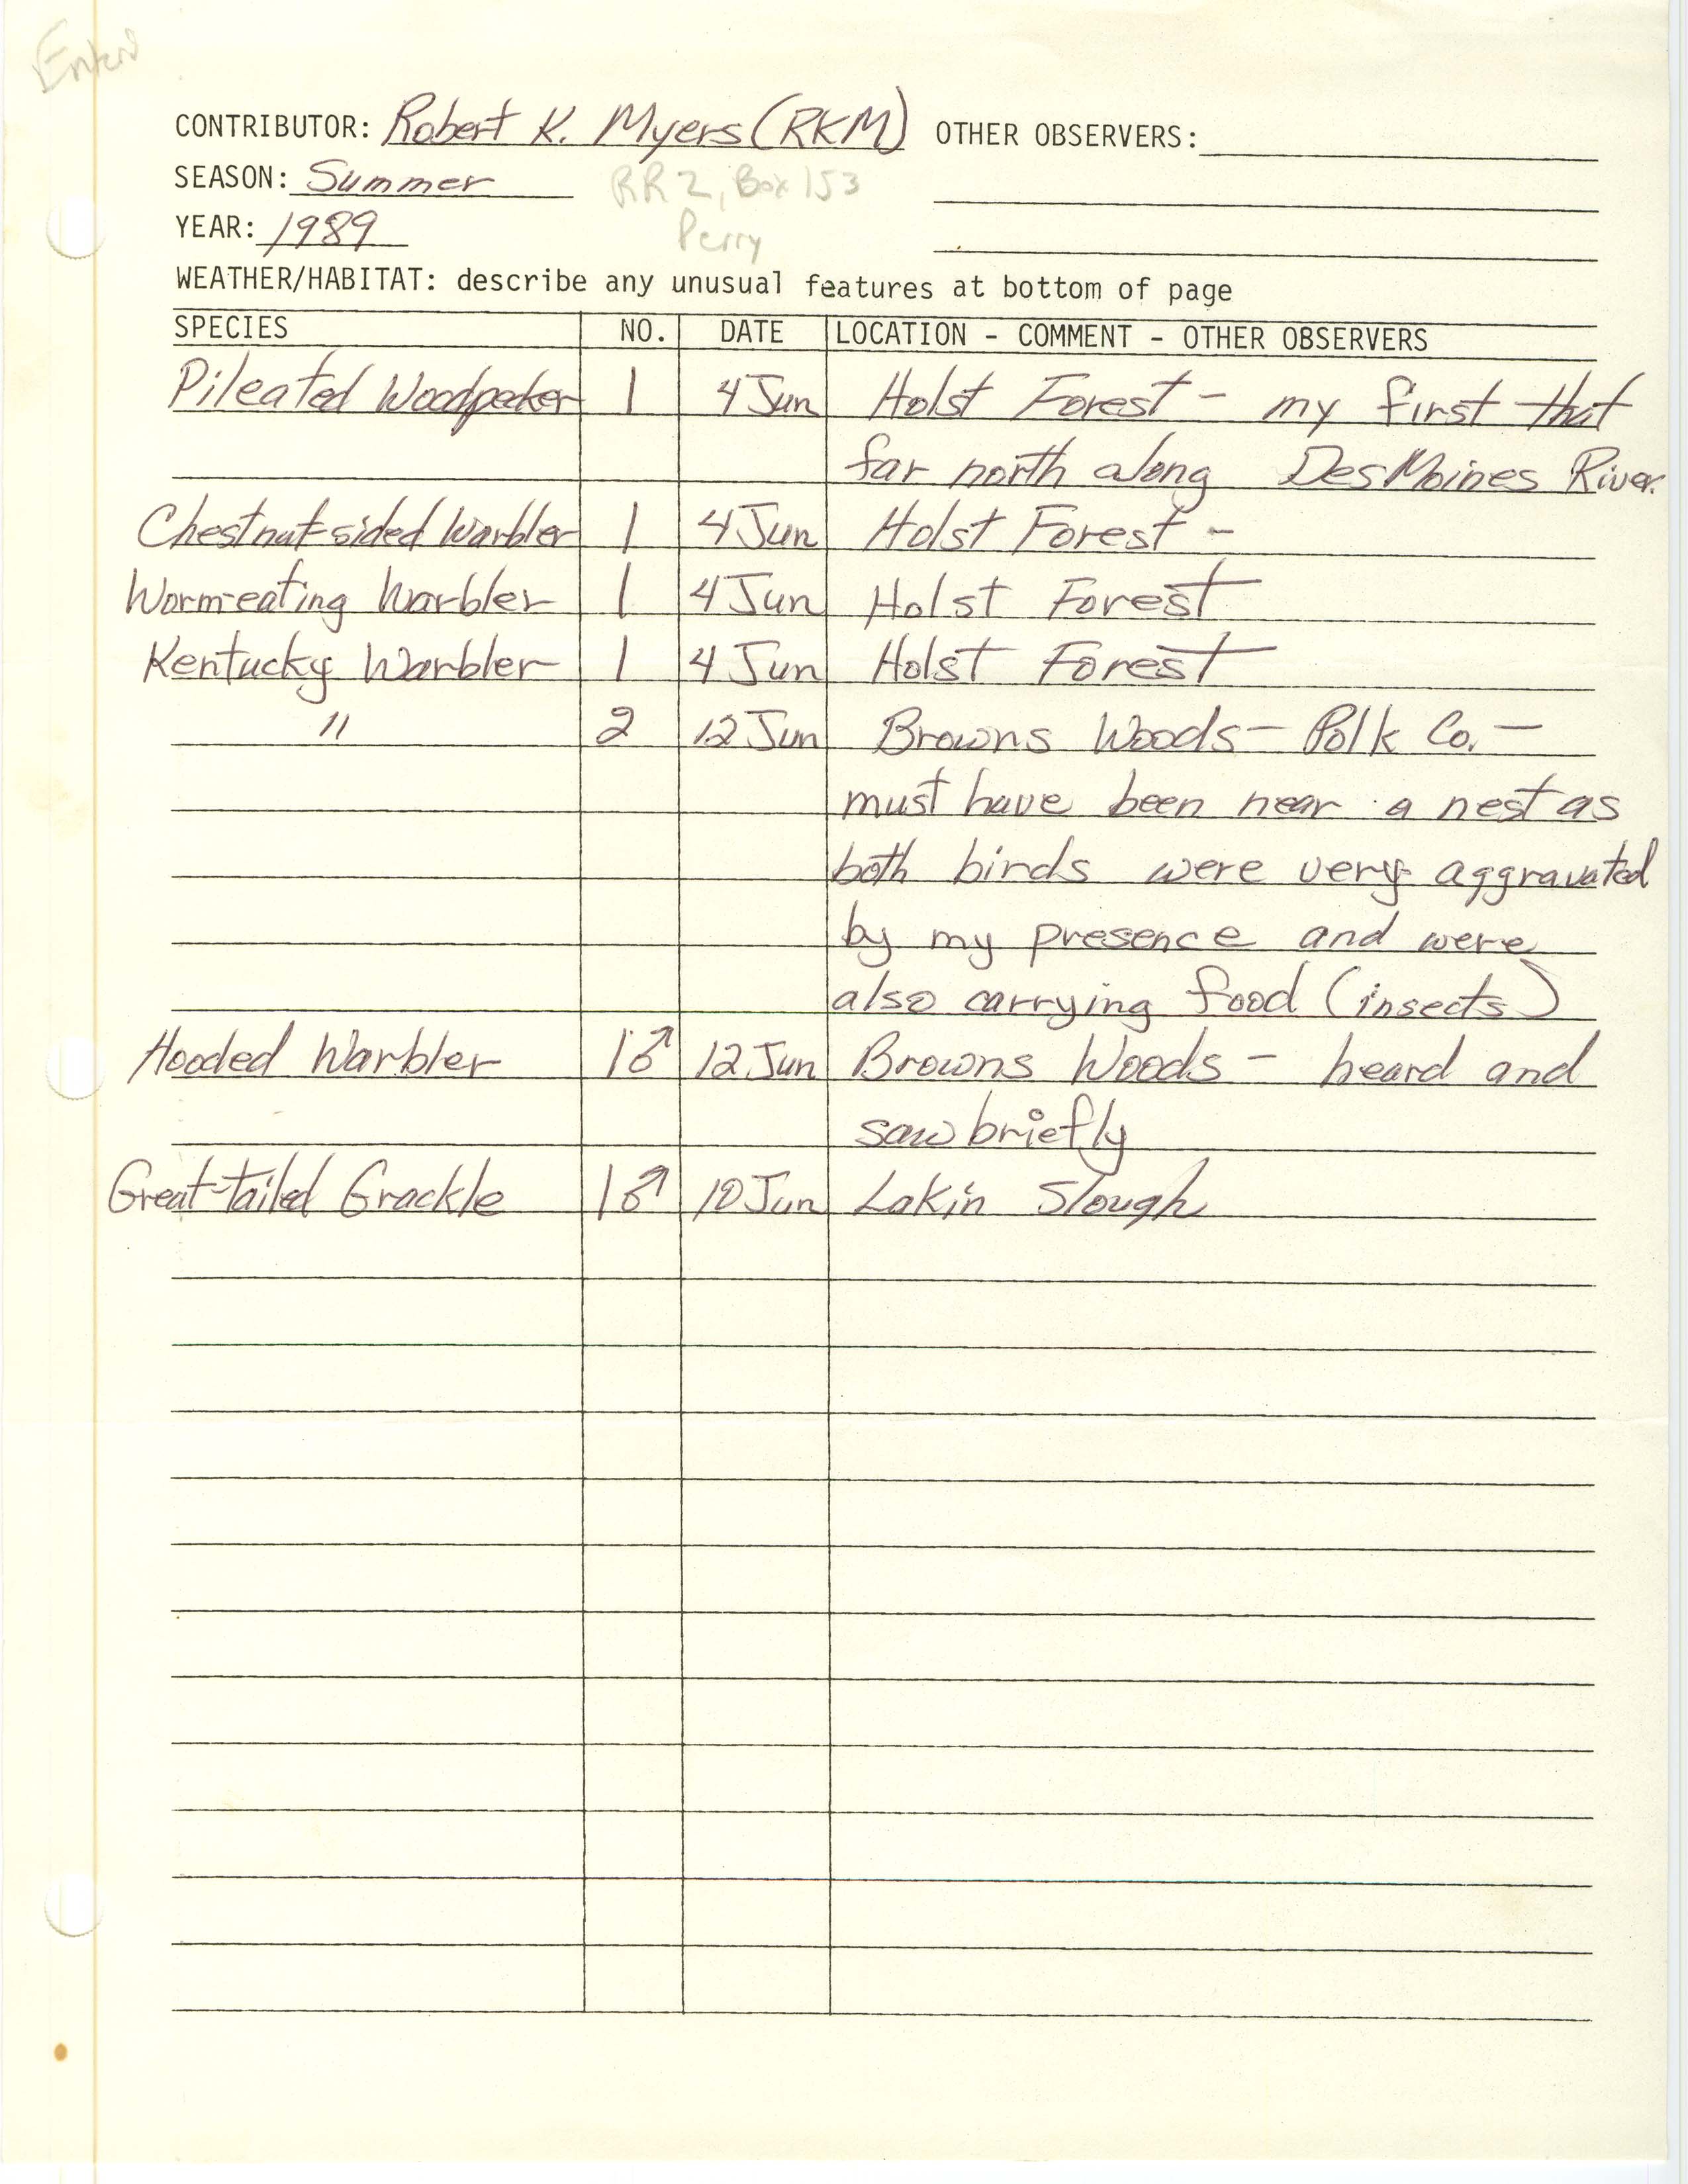 Field notes contributed by Robert K. Myers, summer 1989